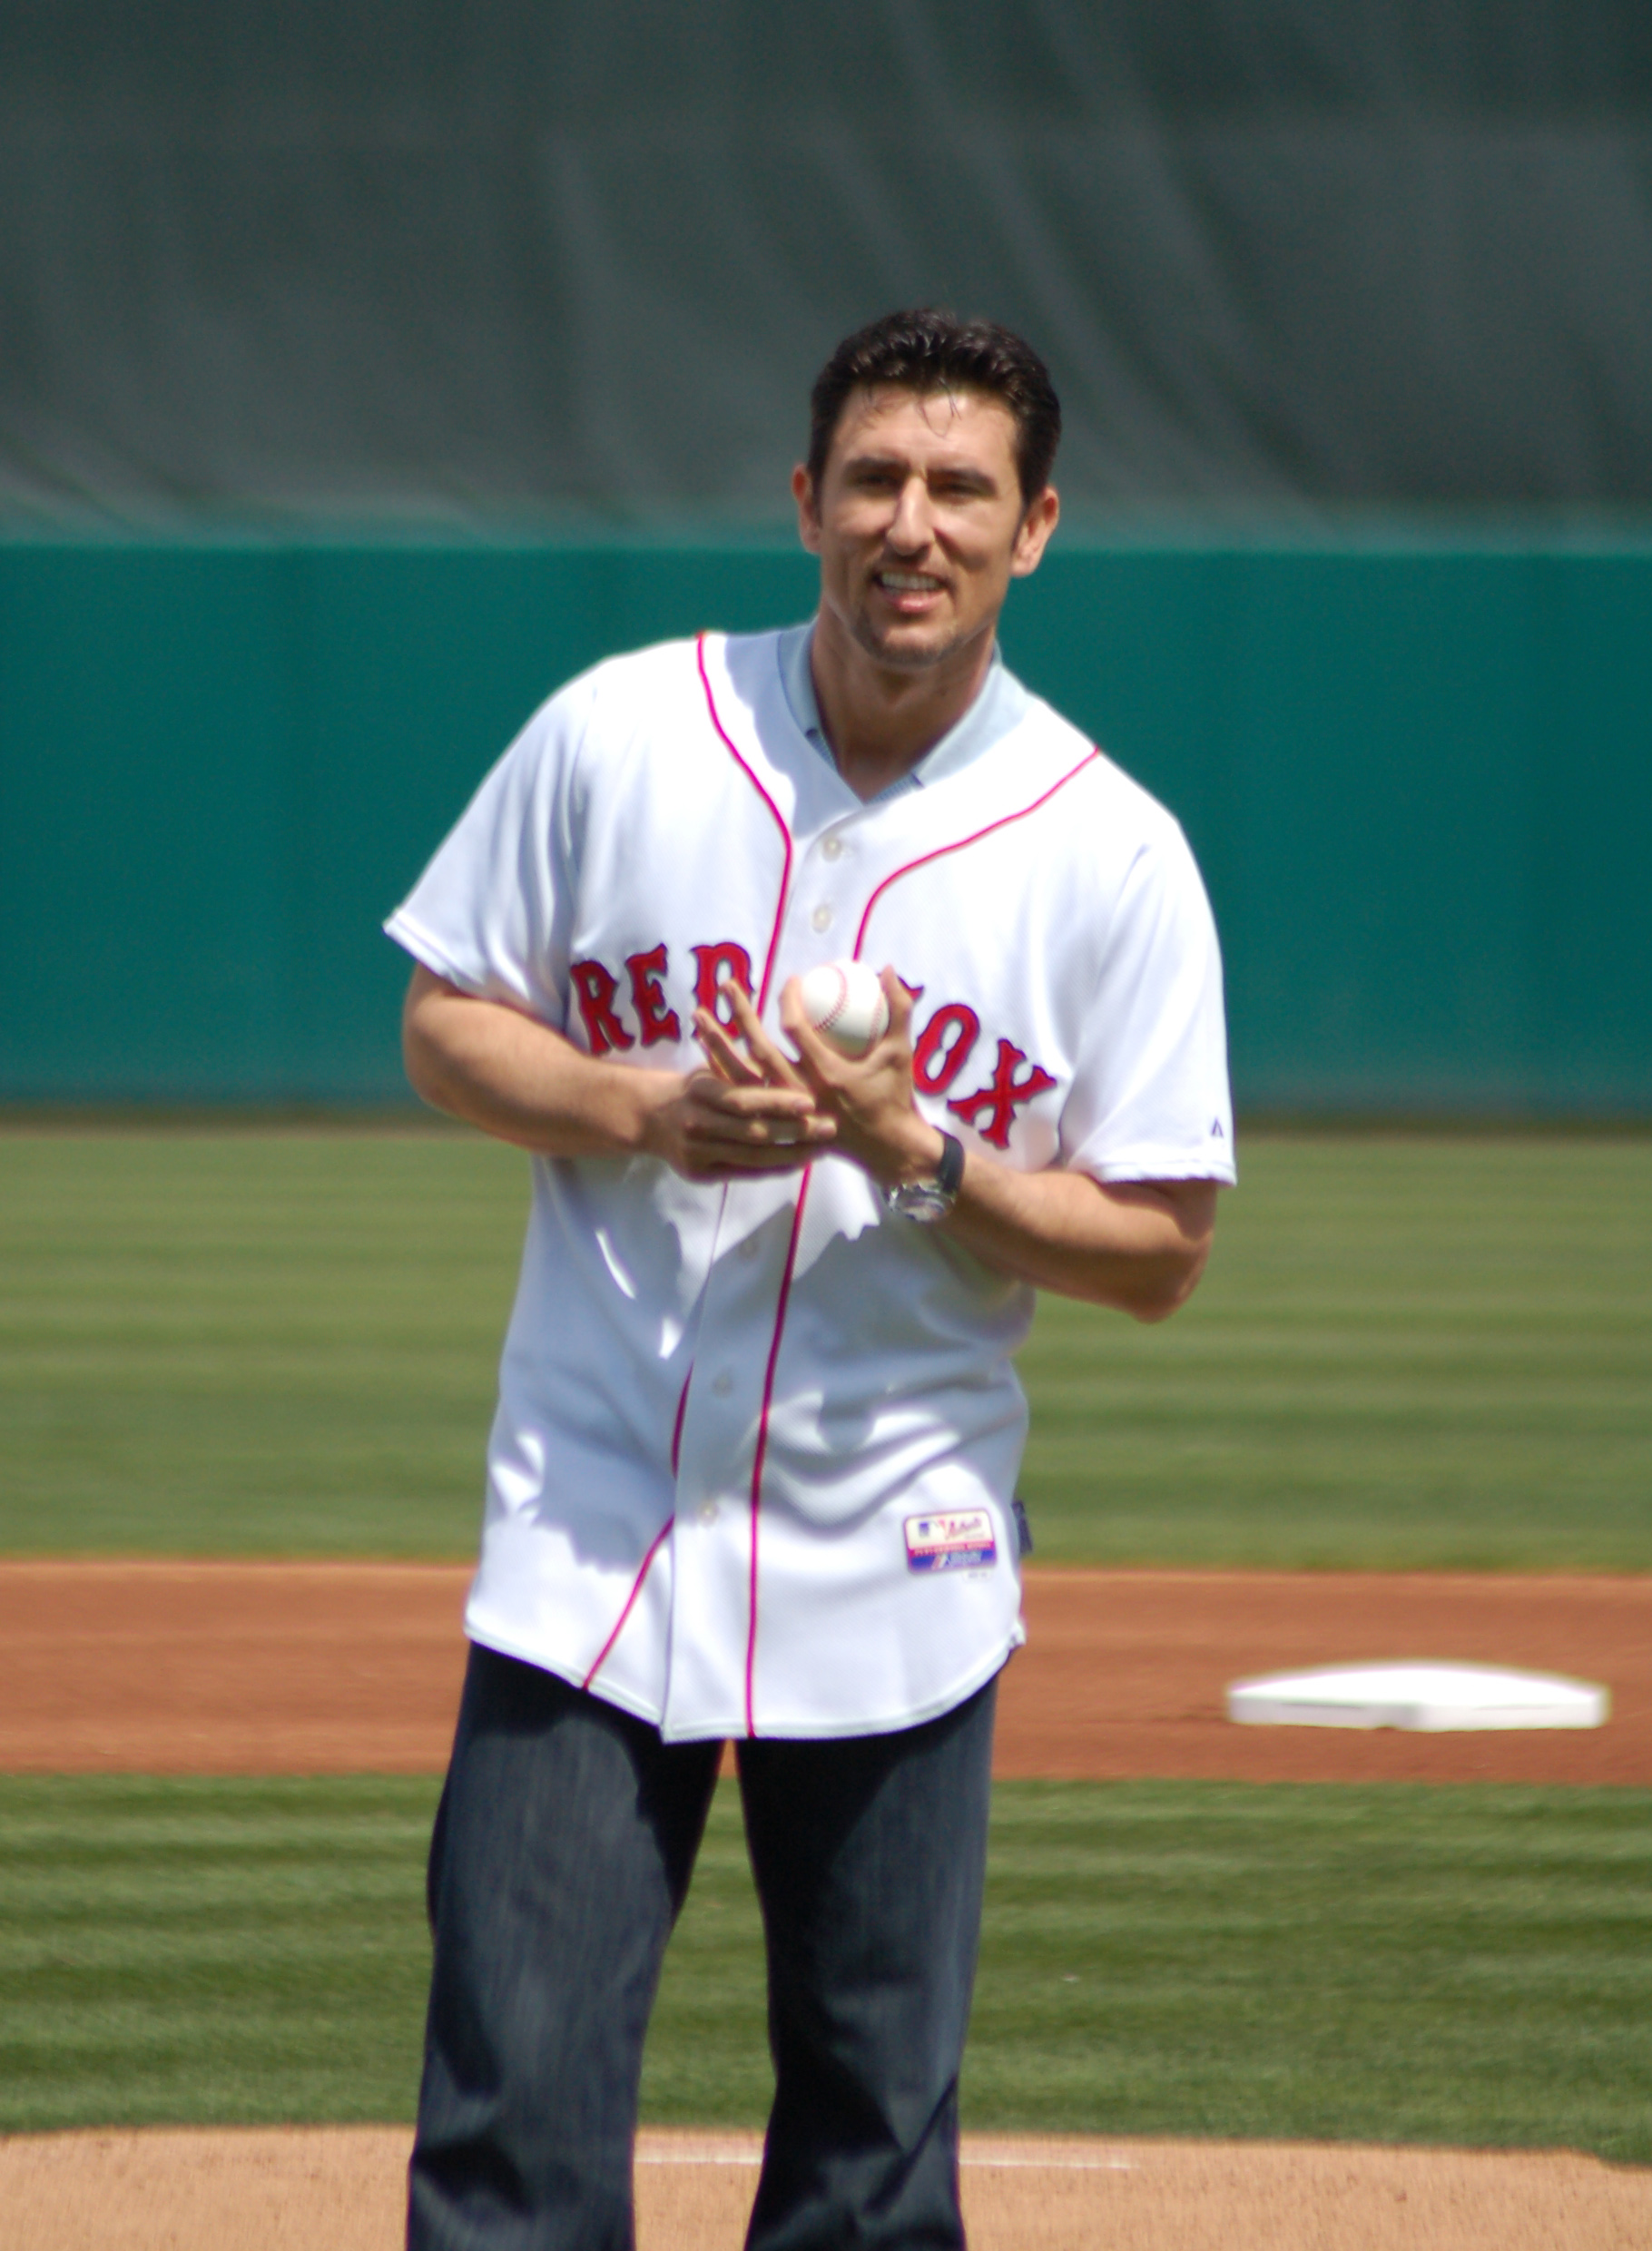 Garciaparra inks two-year deal with Dodgers